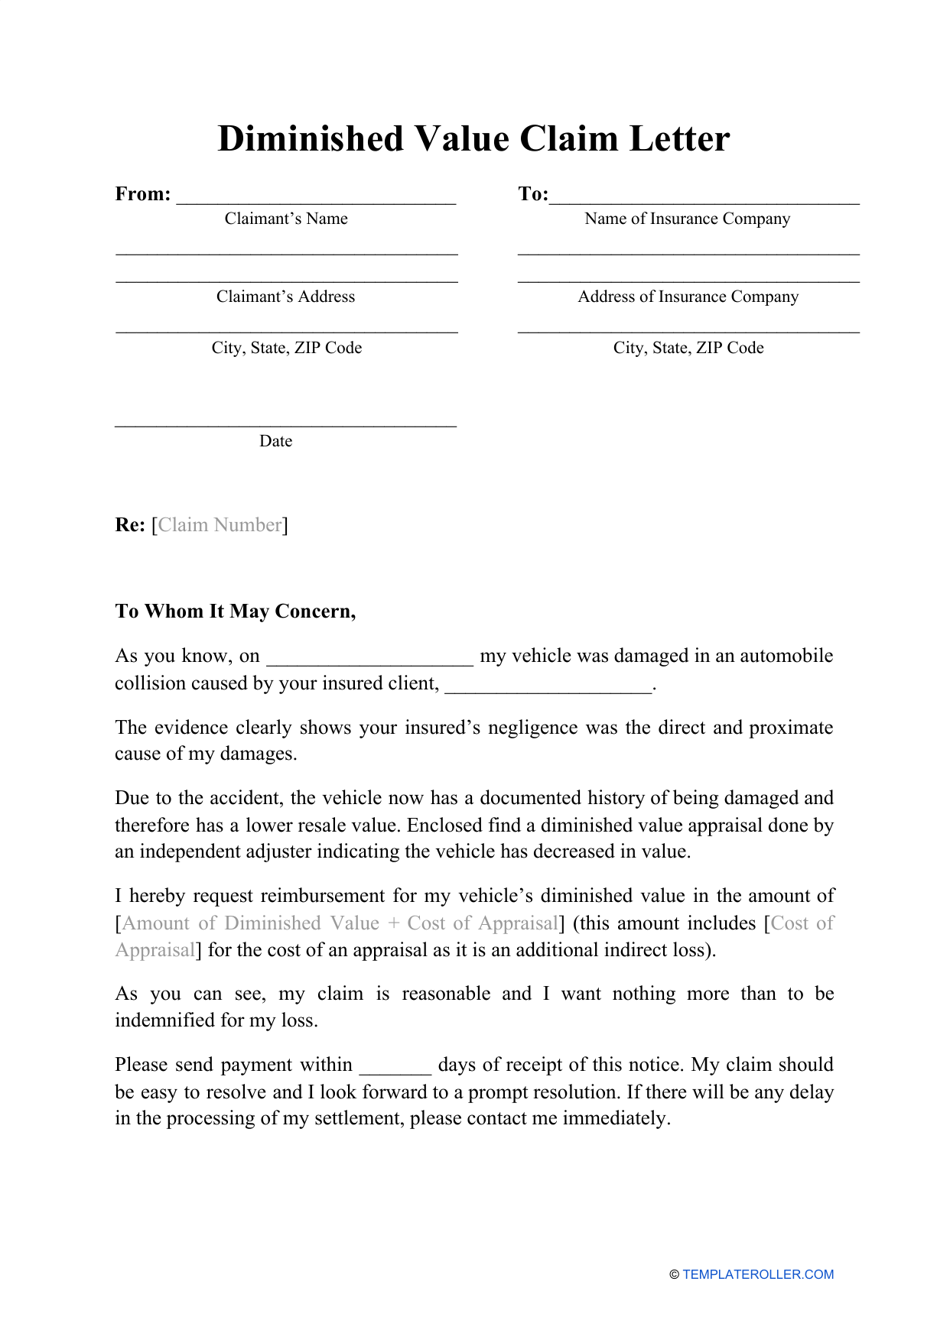 Diminished Value Claim Letter Template Image Preview